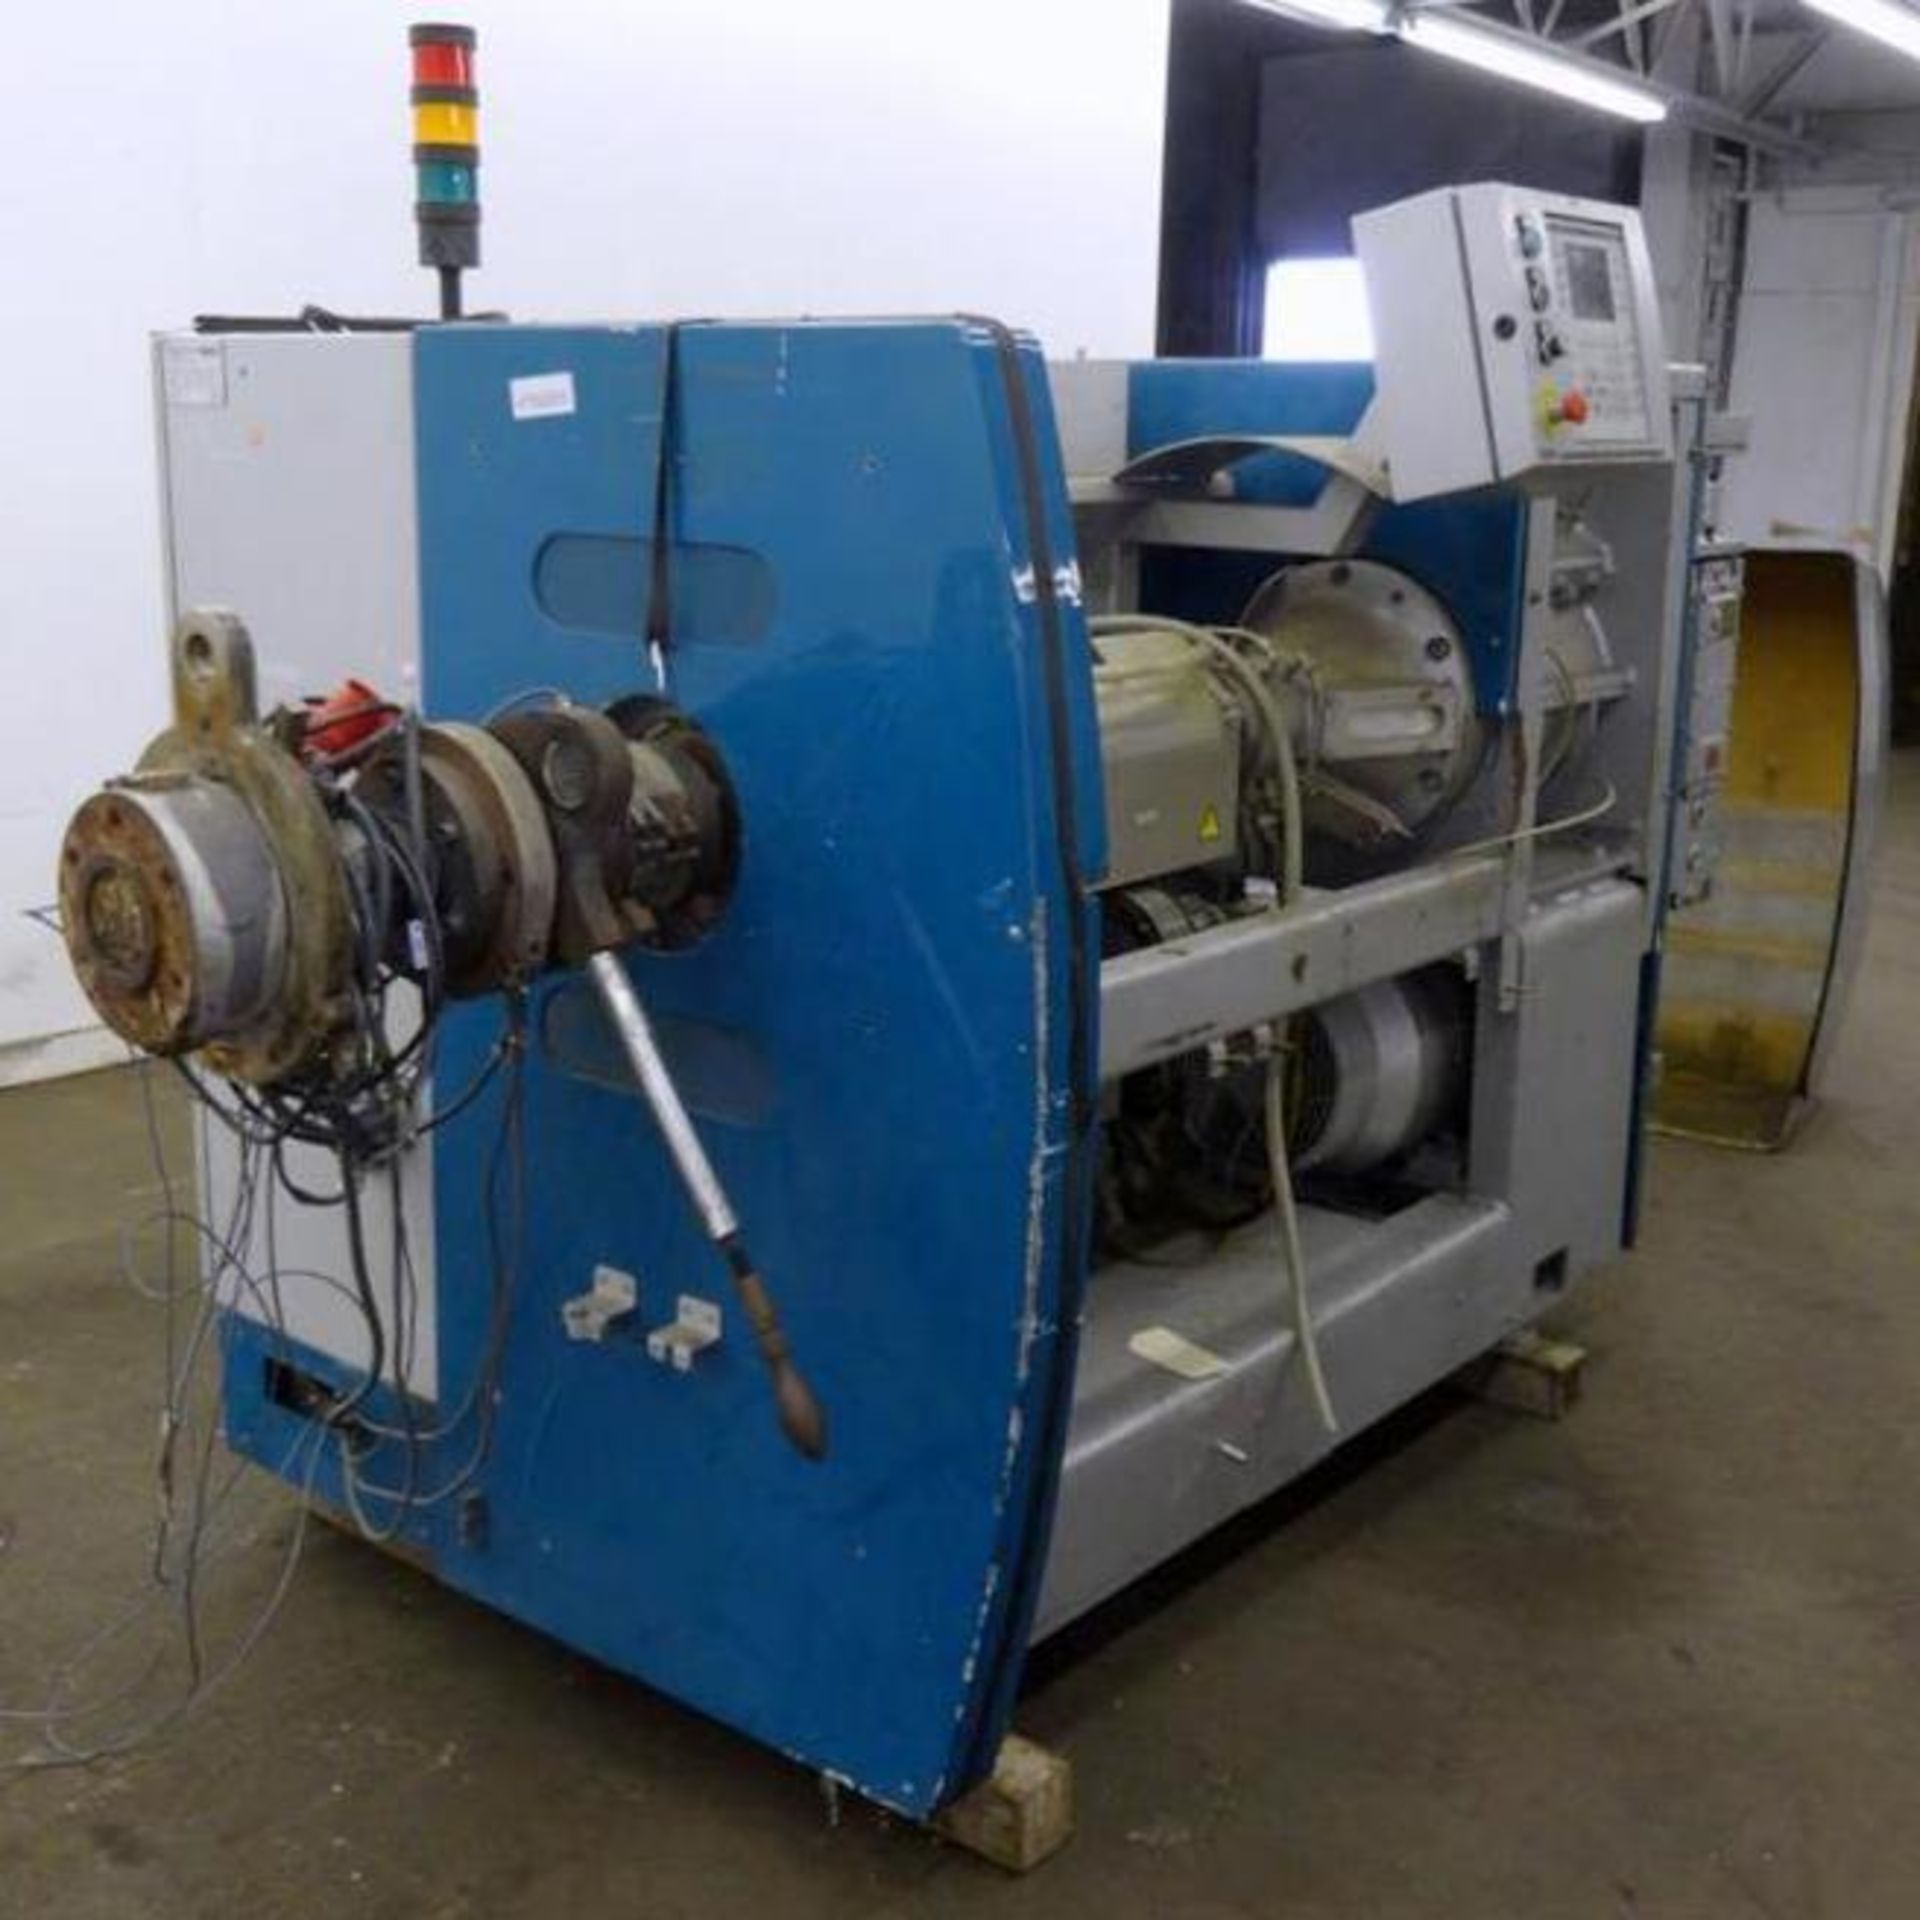 NGR Next Generation Recycling Machine 65mm (2.55") Single Screw Extruder - Image 6 of 33